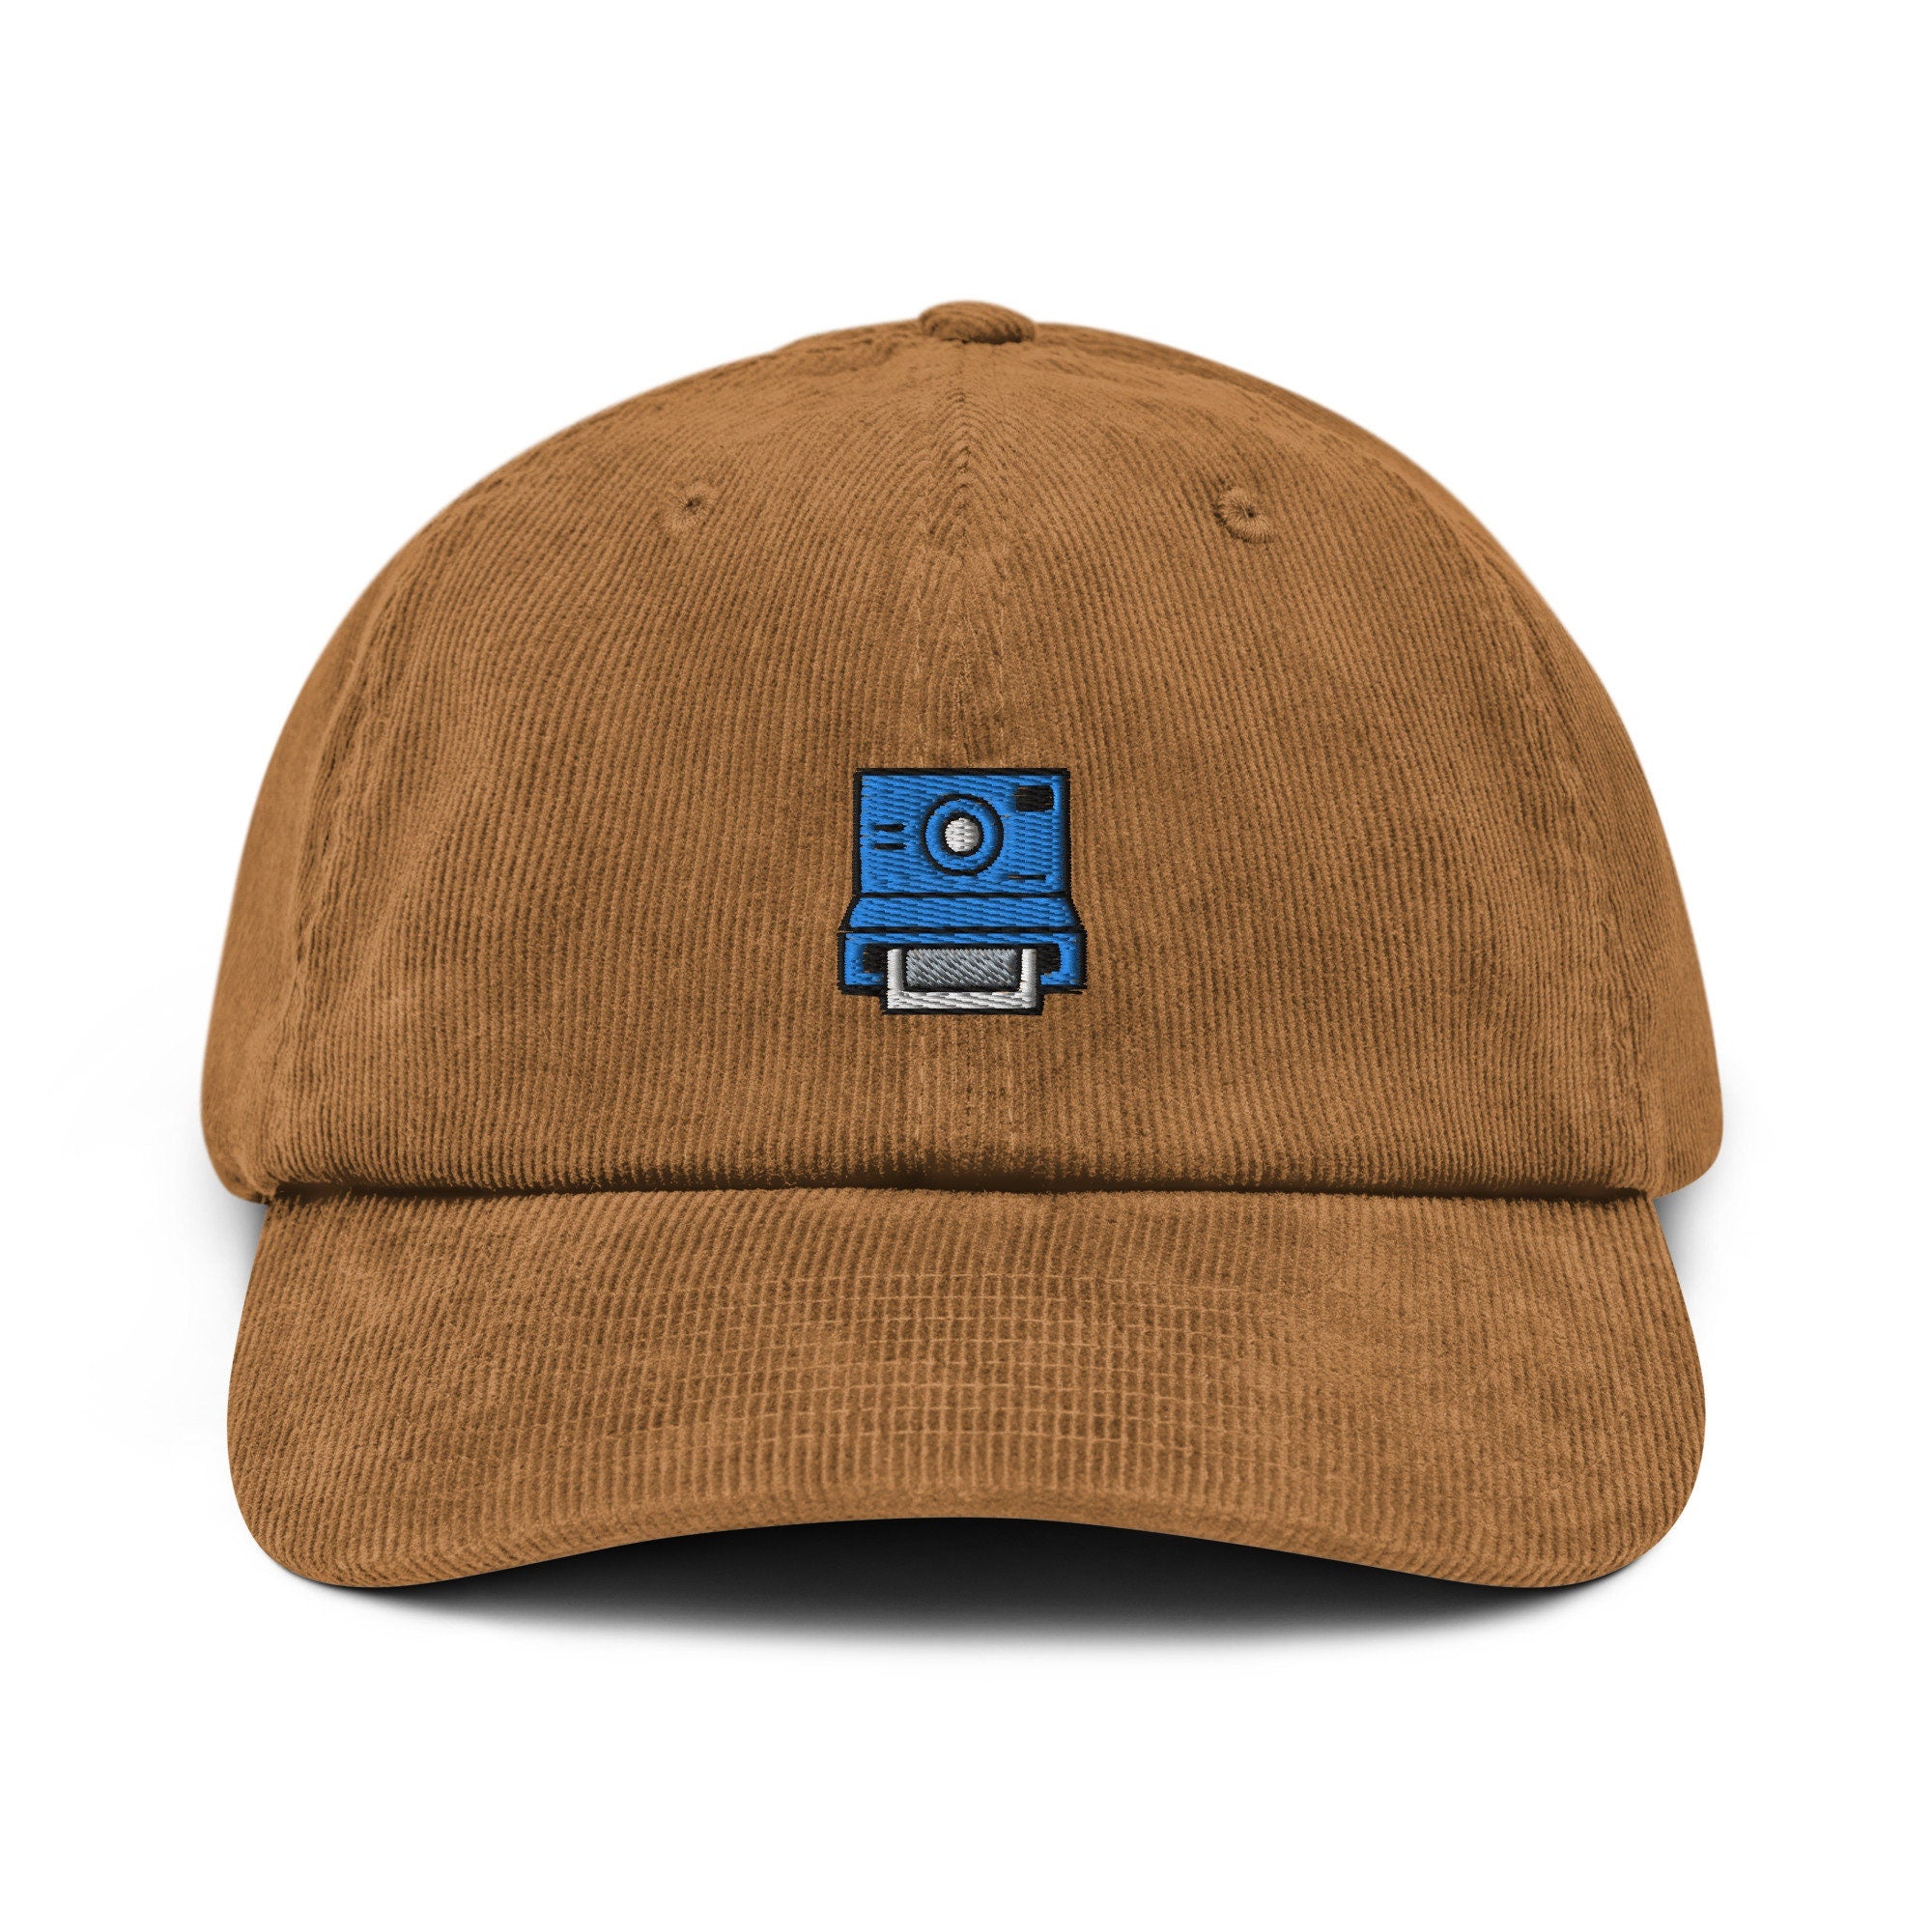 Camera Corduroy Hat, Handmade Embroidered Corduroy Dad Cap - Multiple Colors